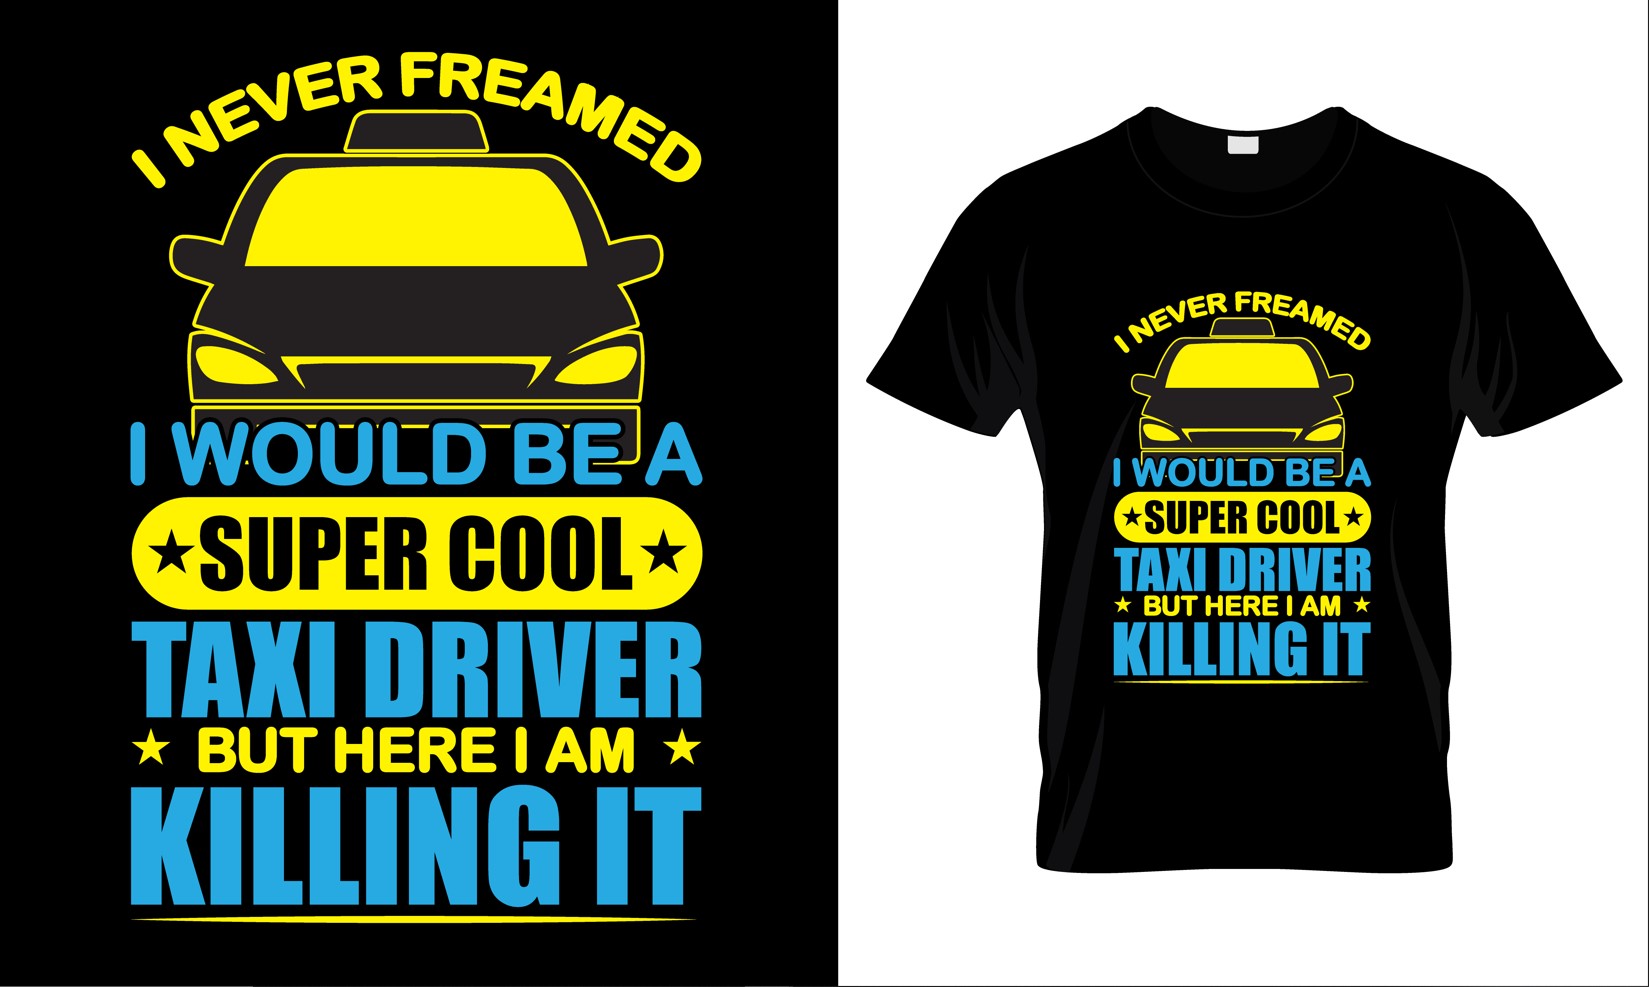 Image of a t-shirt with an irresistible taxi print and lettering